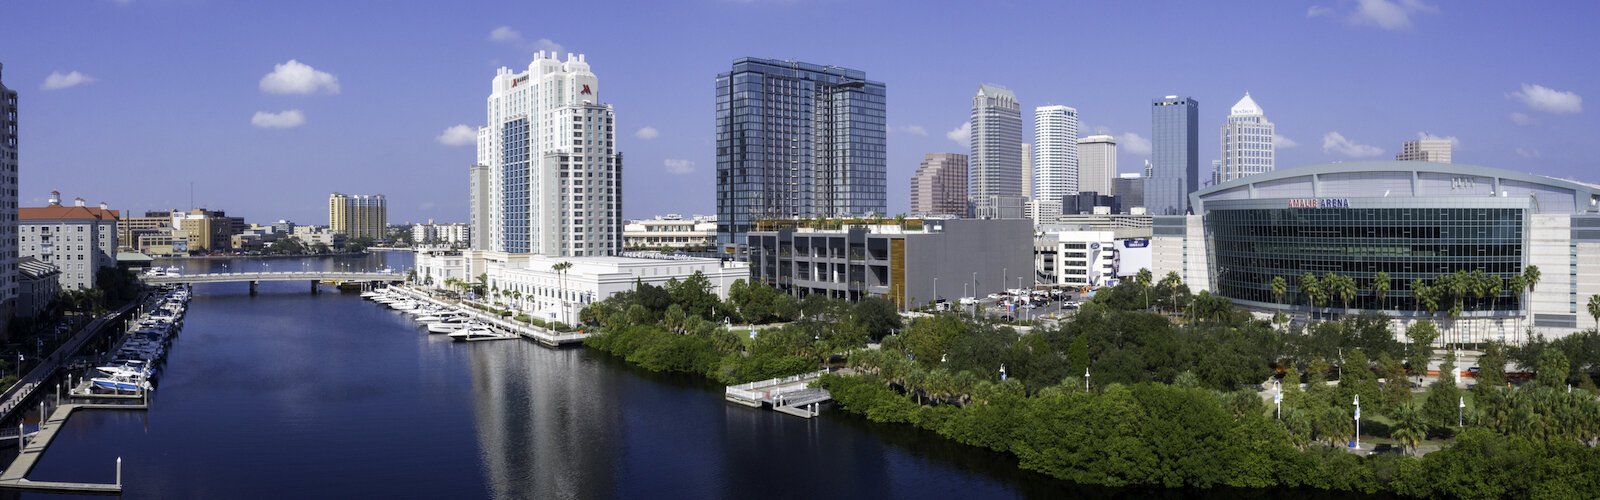 Water Street Tampa Takes Shape As Cranes Dot The Sky Construction